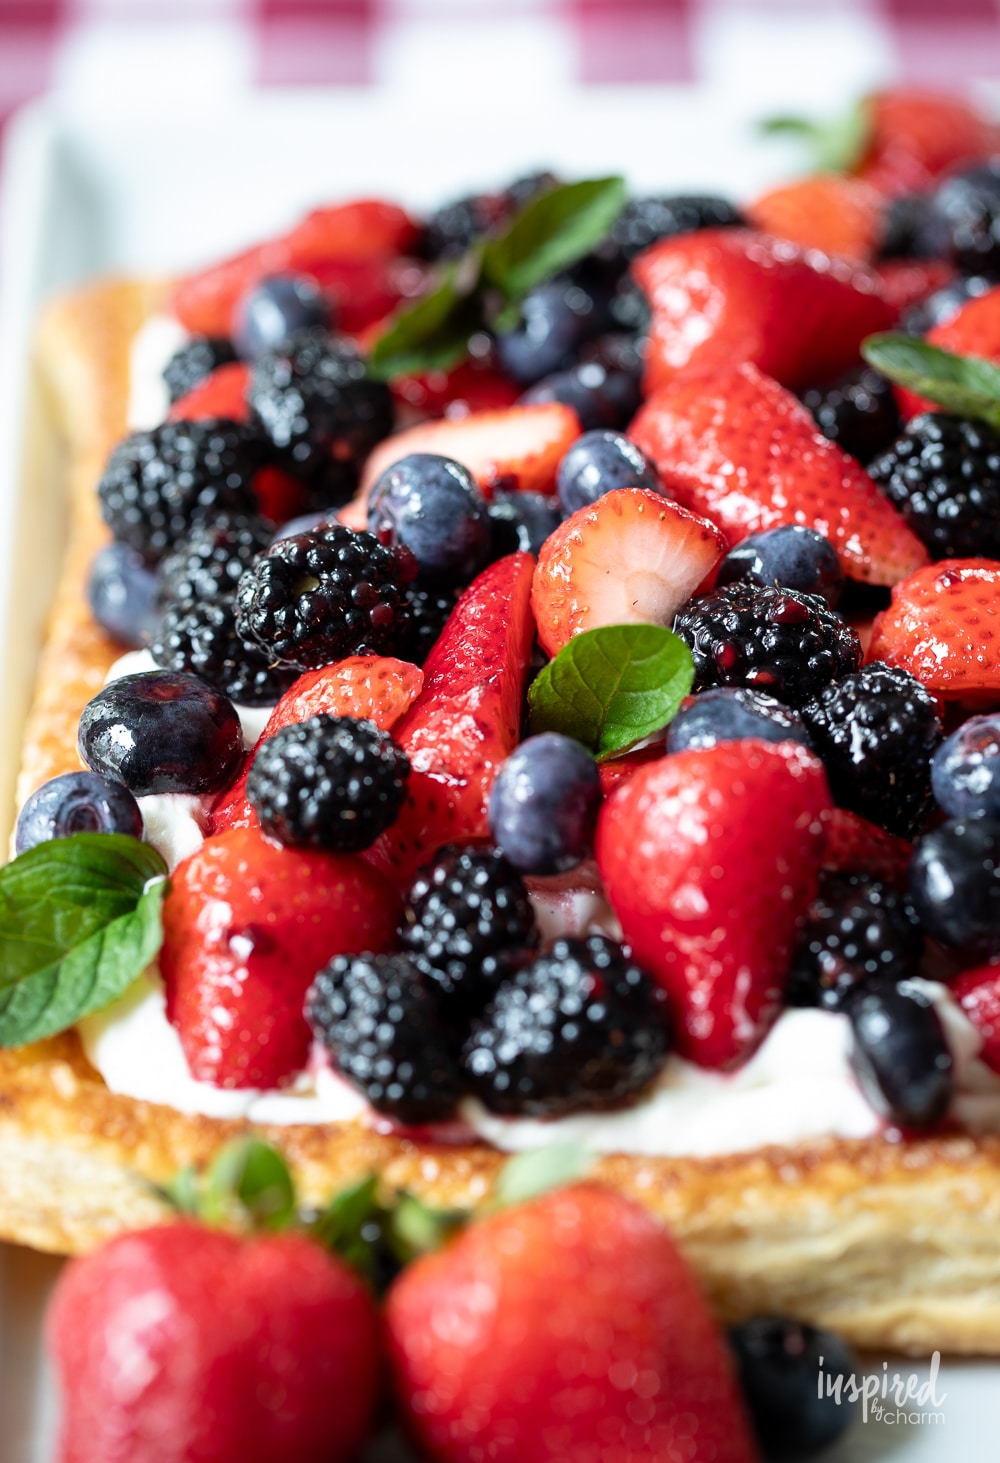 fruit pizza loaded with fresh berries and garnish with mint leaves.